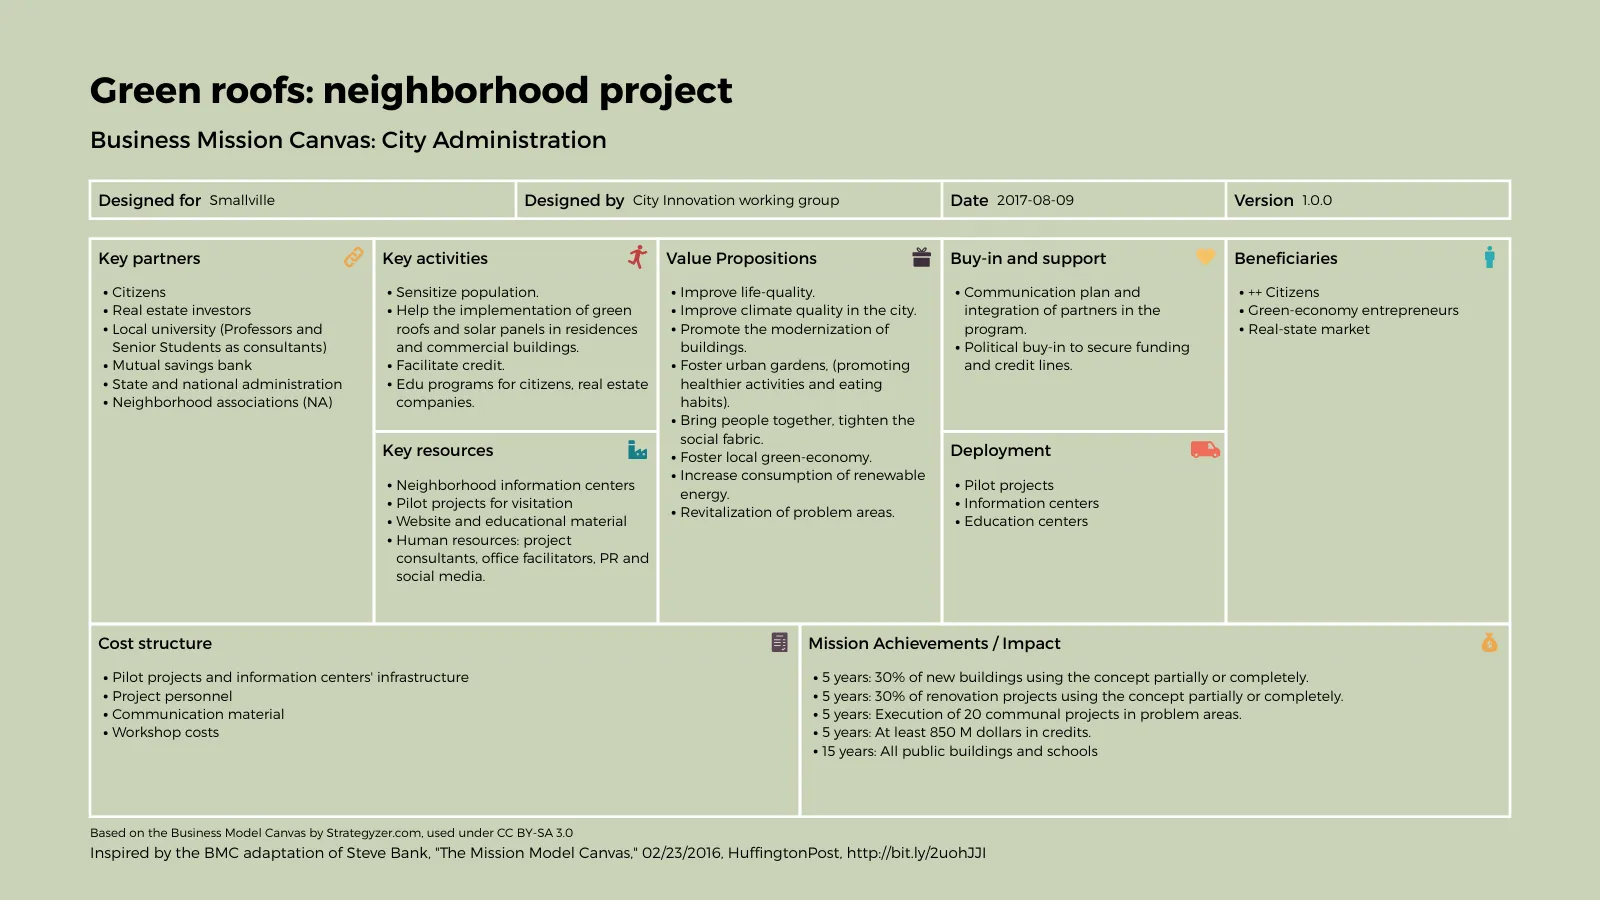 Business Model Canvas example: Green roofs: neighborhood project